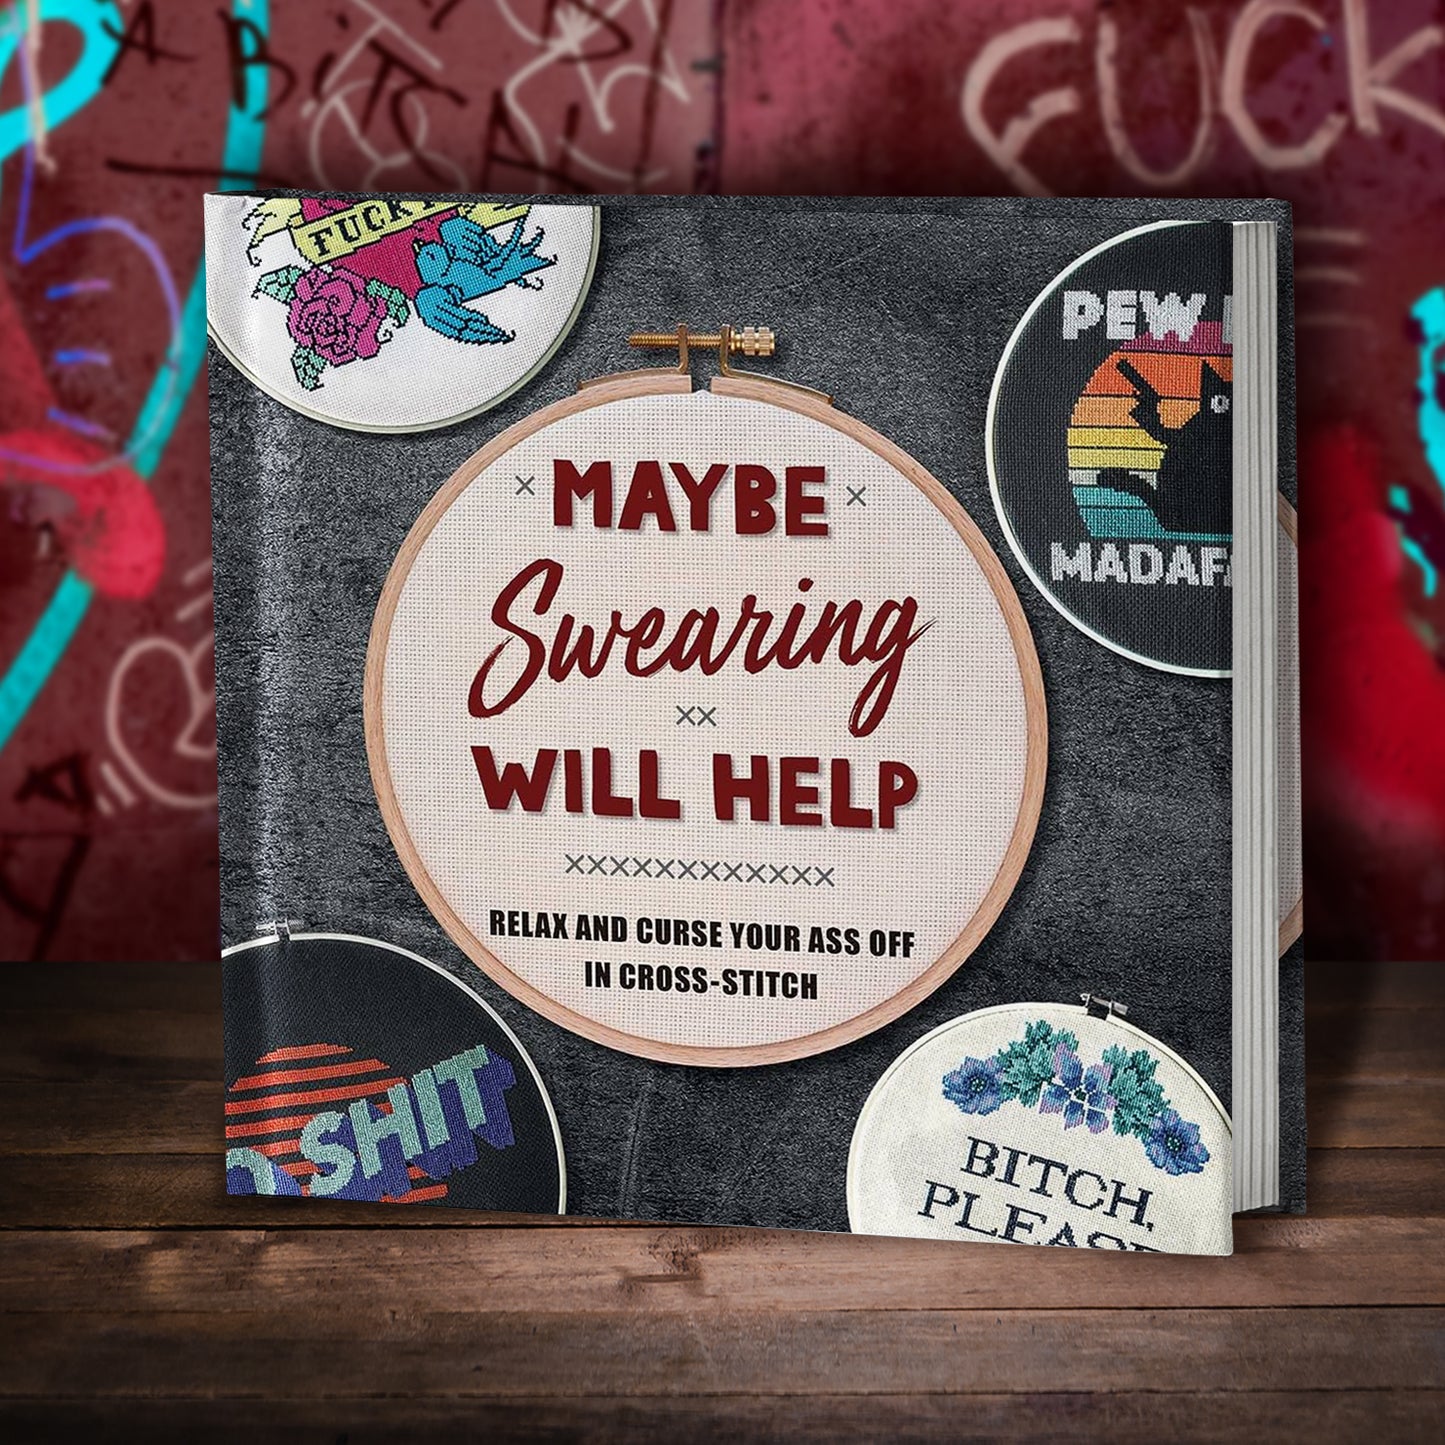 A black book on a wood table, with a graffiti-covered red wall behind it. On the cover is a round cross-stitch project with red text reading "Maybe swearing will help." Below that in black text is "relax and curse your ass off in cross-stitch."